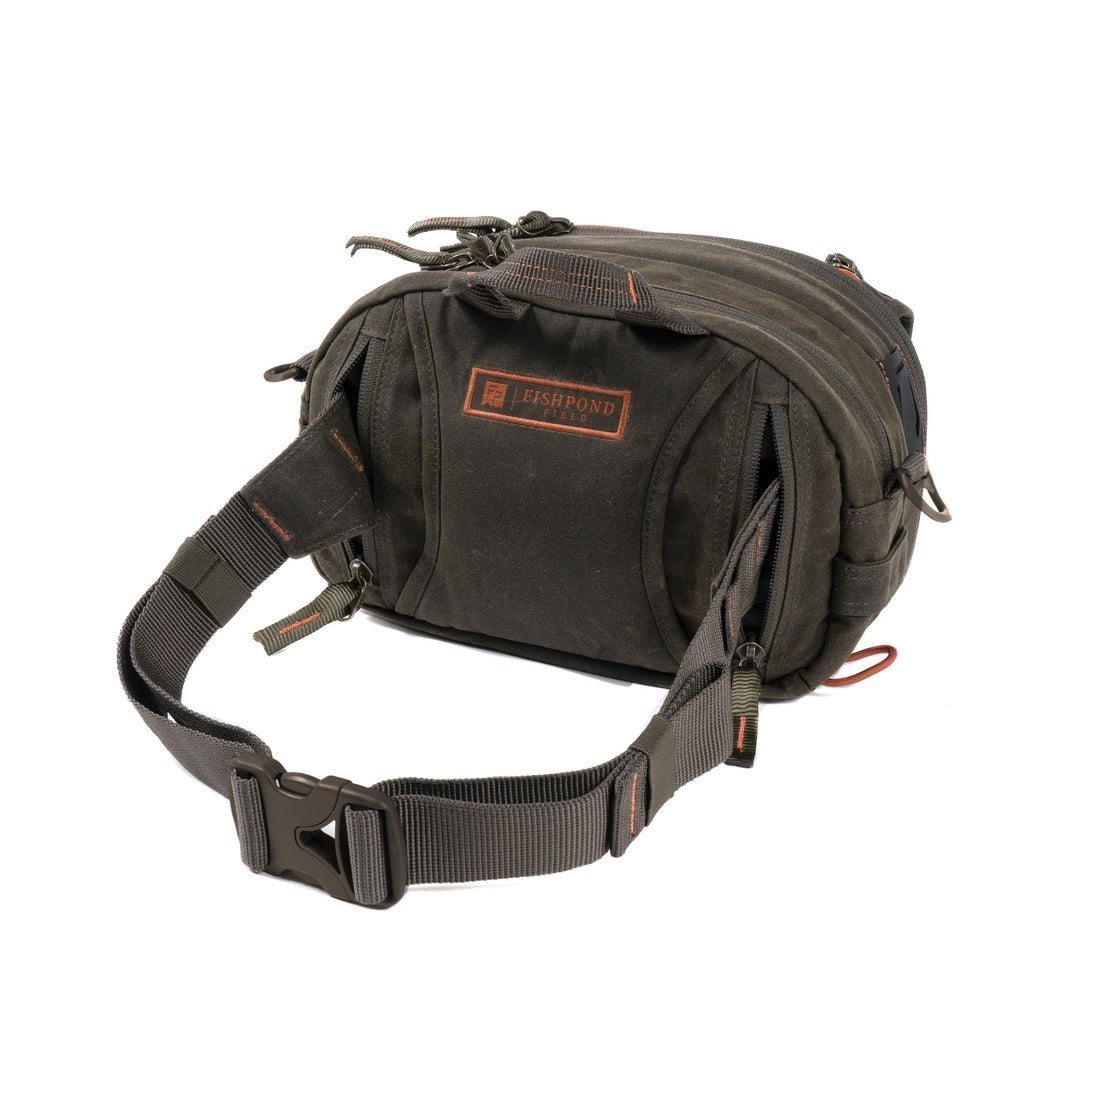 Fishpond Blue River Waxed Canvas Chest/Lumbar Pack